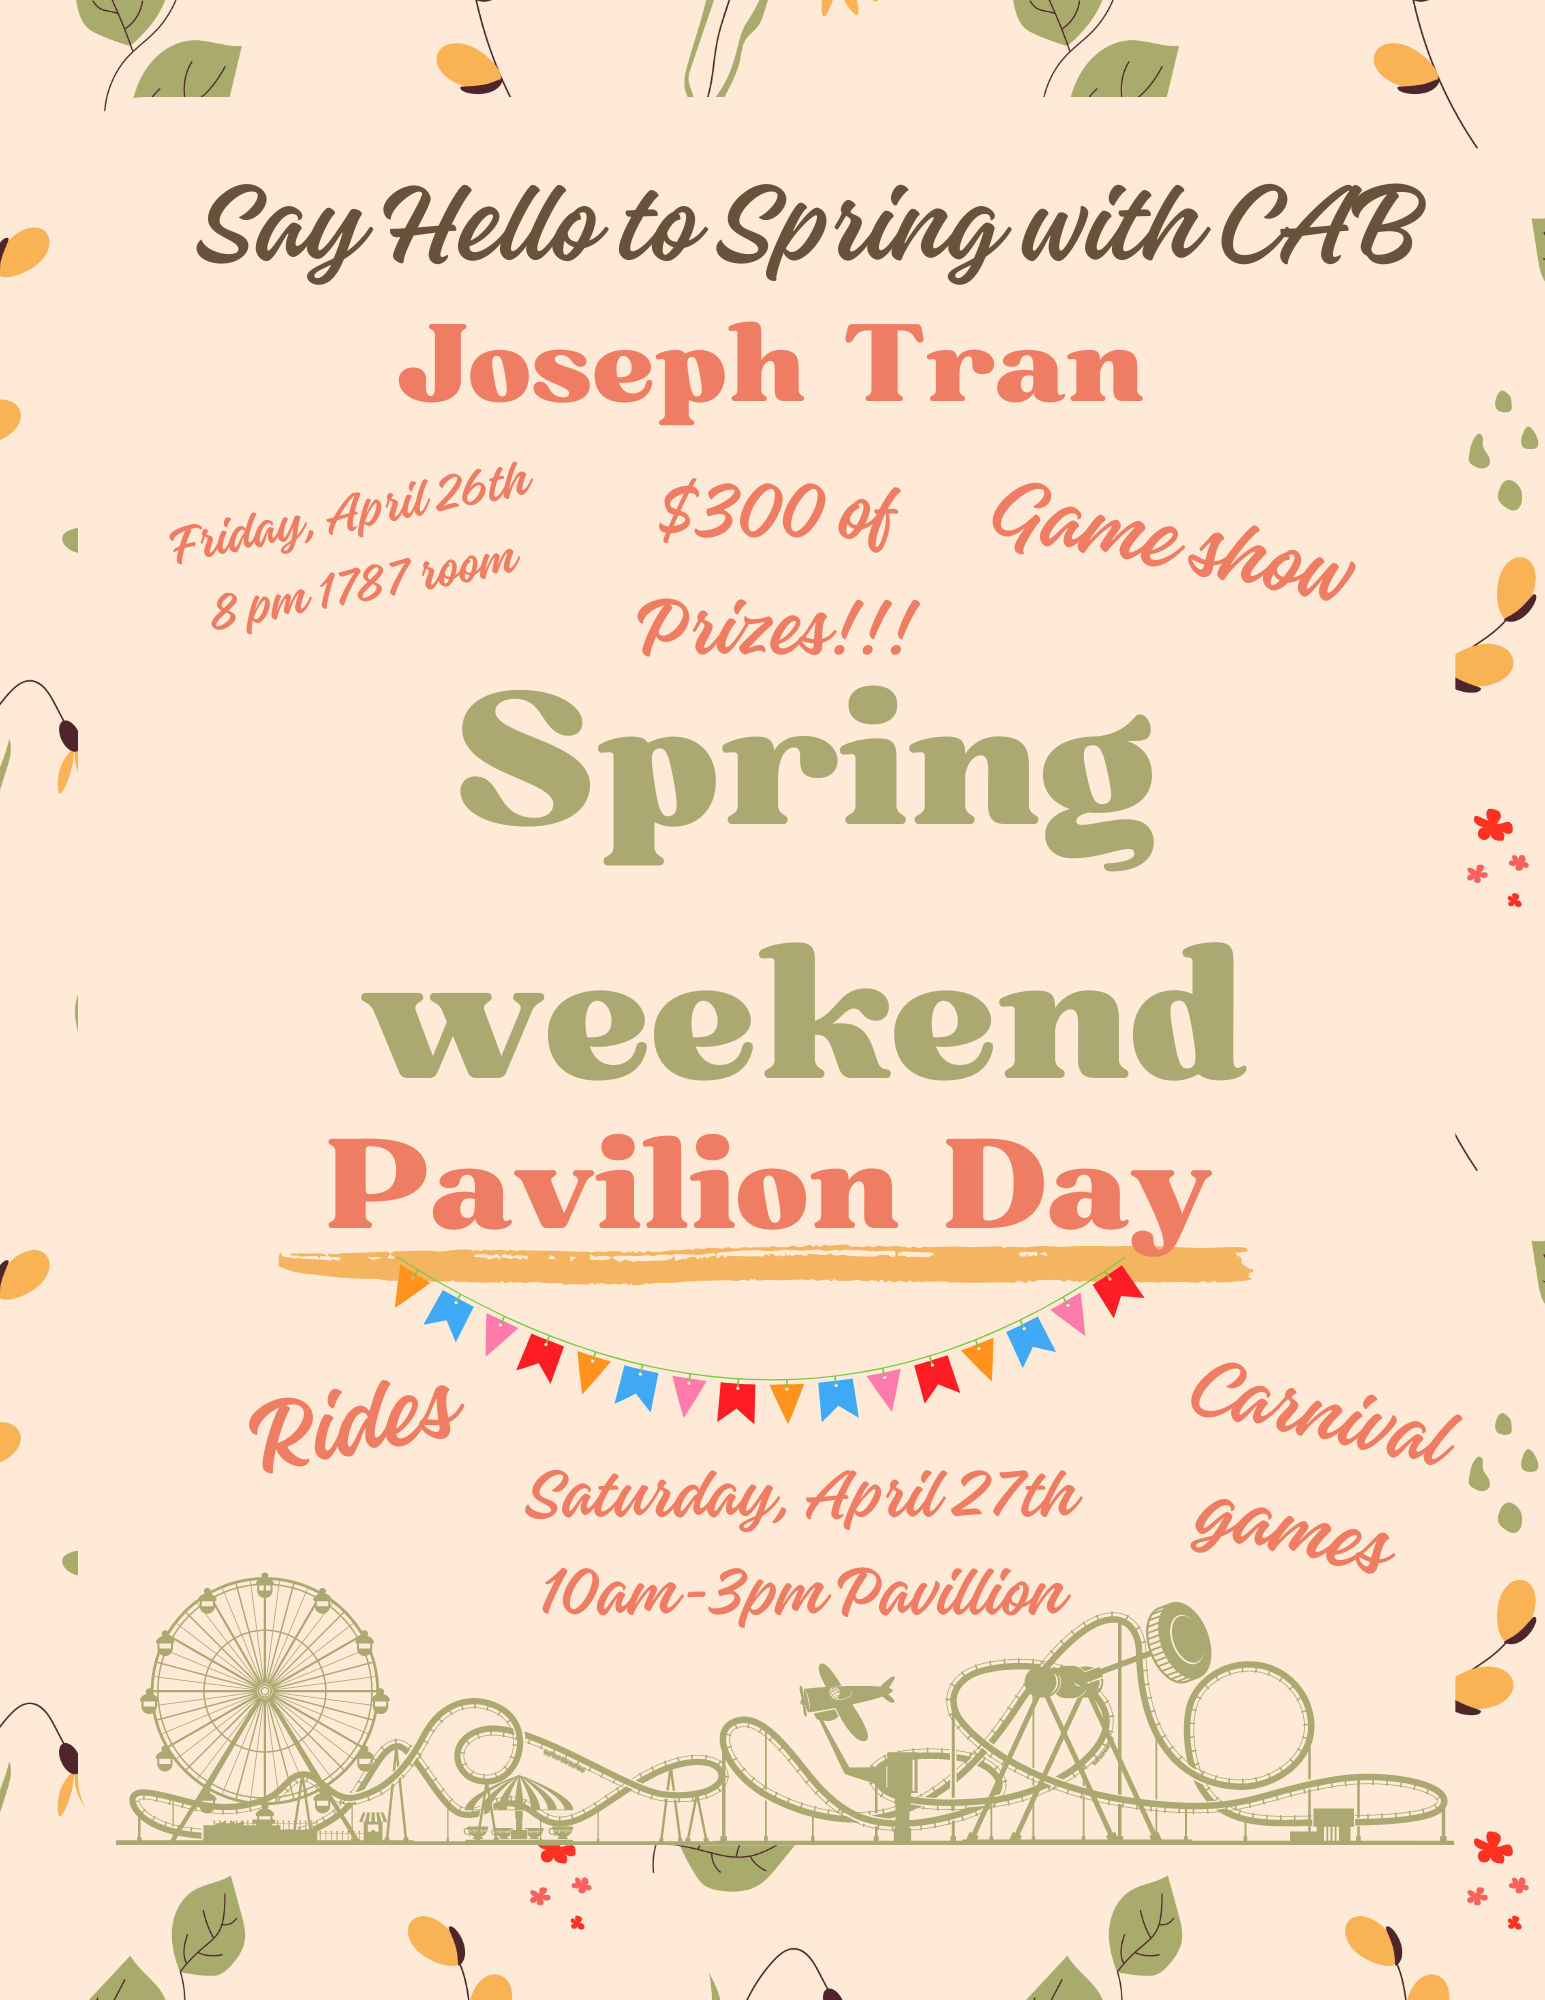 Say hello to Spring with CAB:

Joseph Tran: Game Show!

$300 worth of Prizes!

Friday, April 26th

8pm | 1787 Room

Pavilion Day!

Rides and Carnival Games!

Saturday, April 27th

10am - 3pm | Pavilion